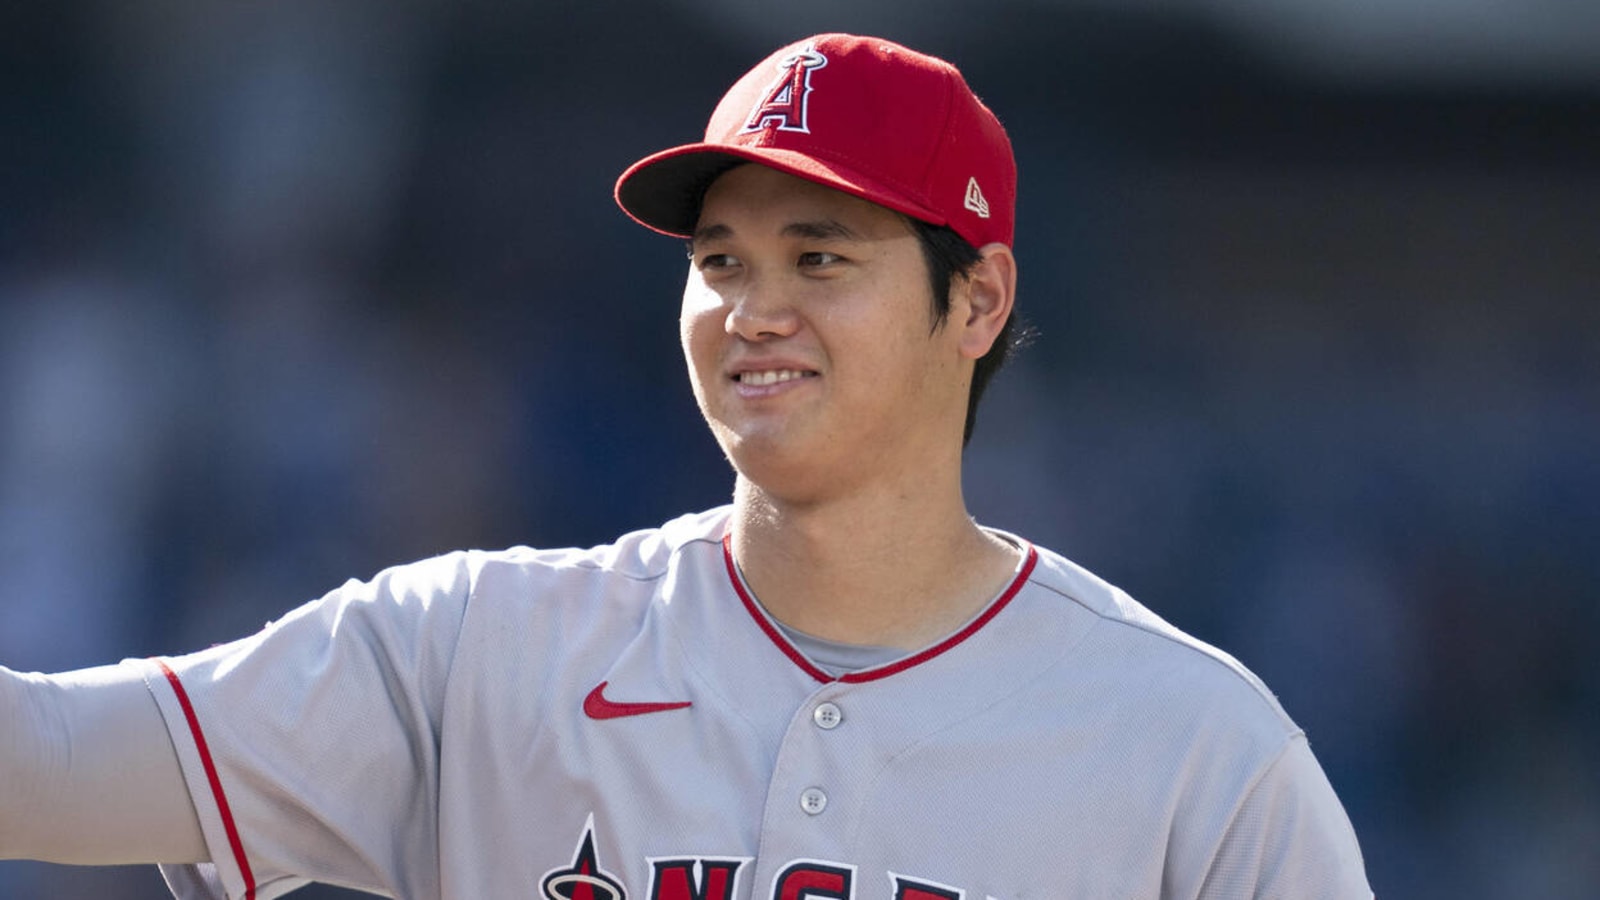 Photo of Mike Trout and Shohei Ohtani celebrating goes viral